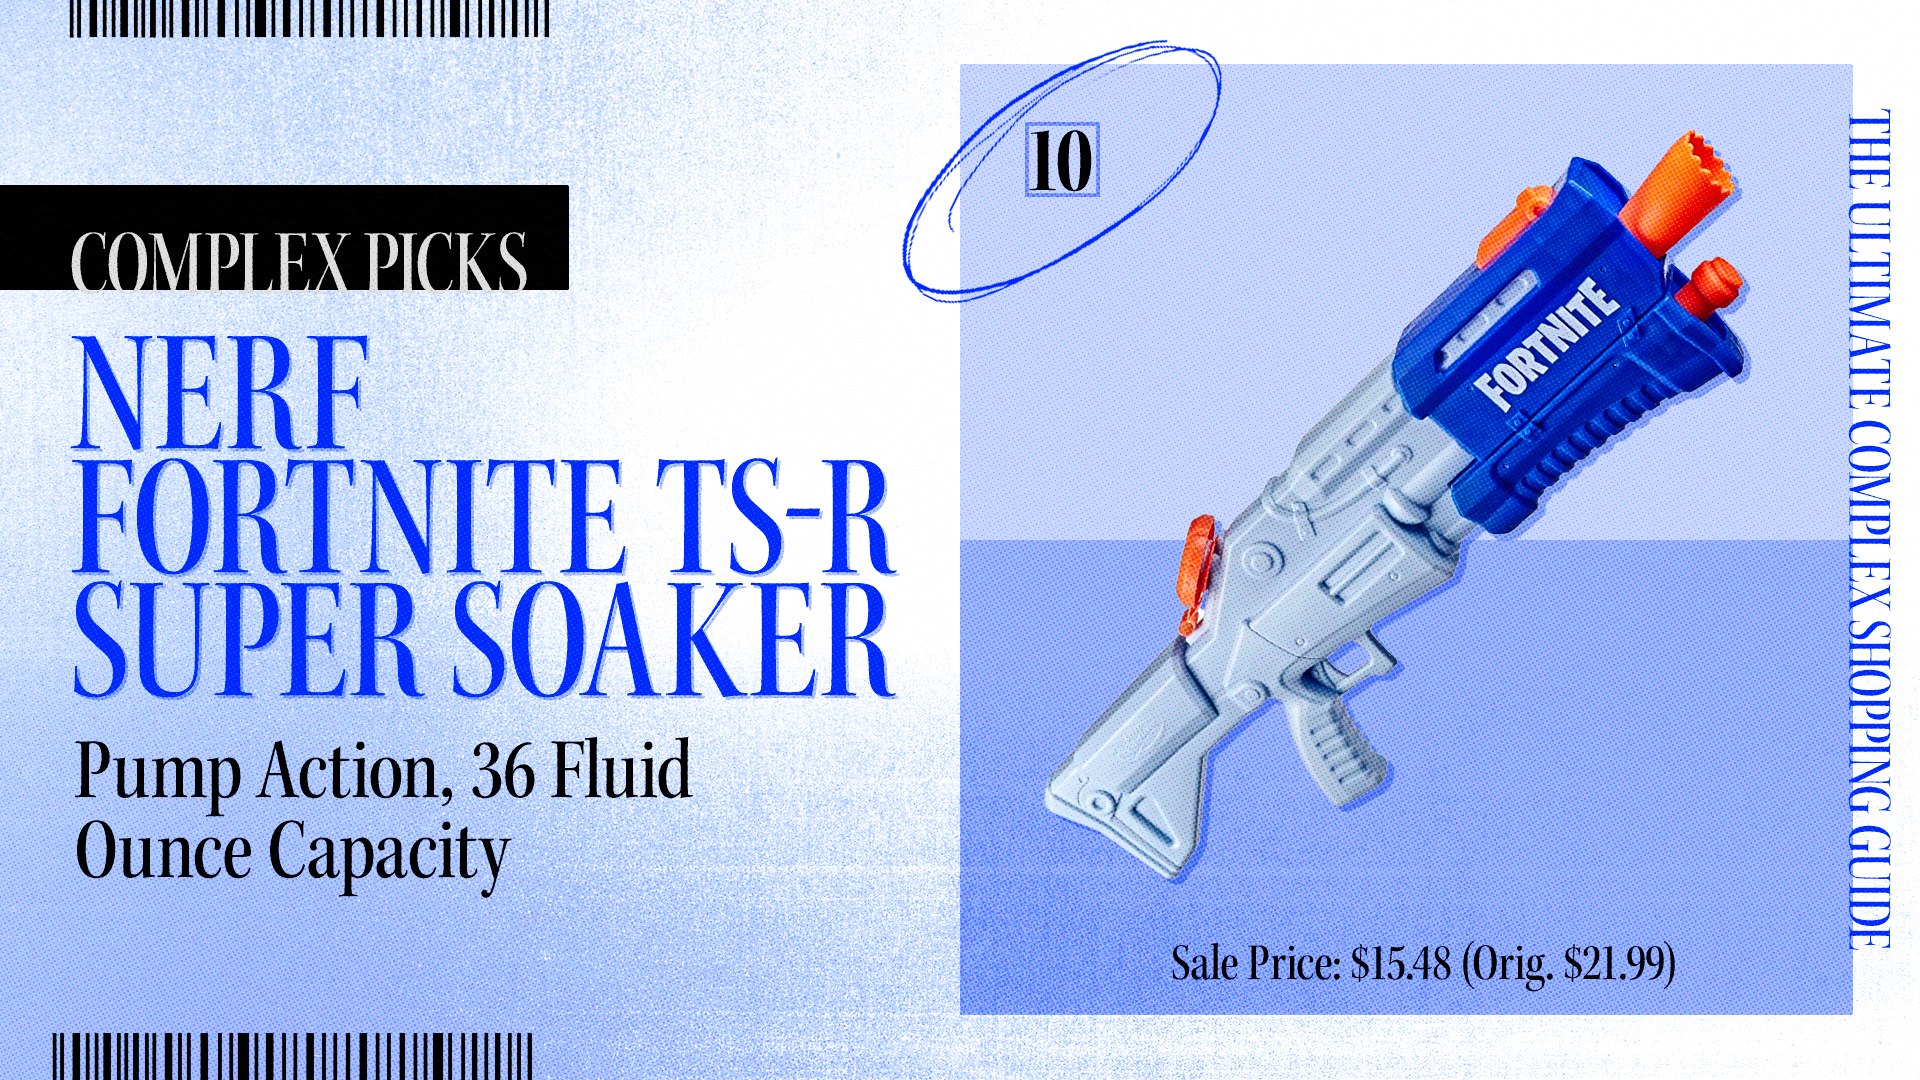 Nerf Fortnite TS-R Super Soaker with 36 fluid ounce capacity. Listed as Complex Pick No. 10. Sale price: $15.48, originally $21.99. Ultimate Complex Shopping Guide